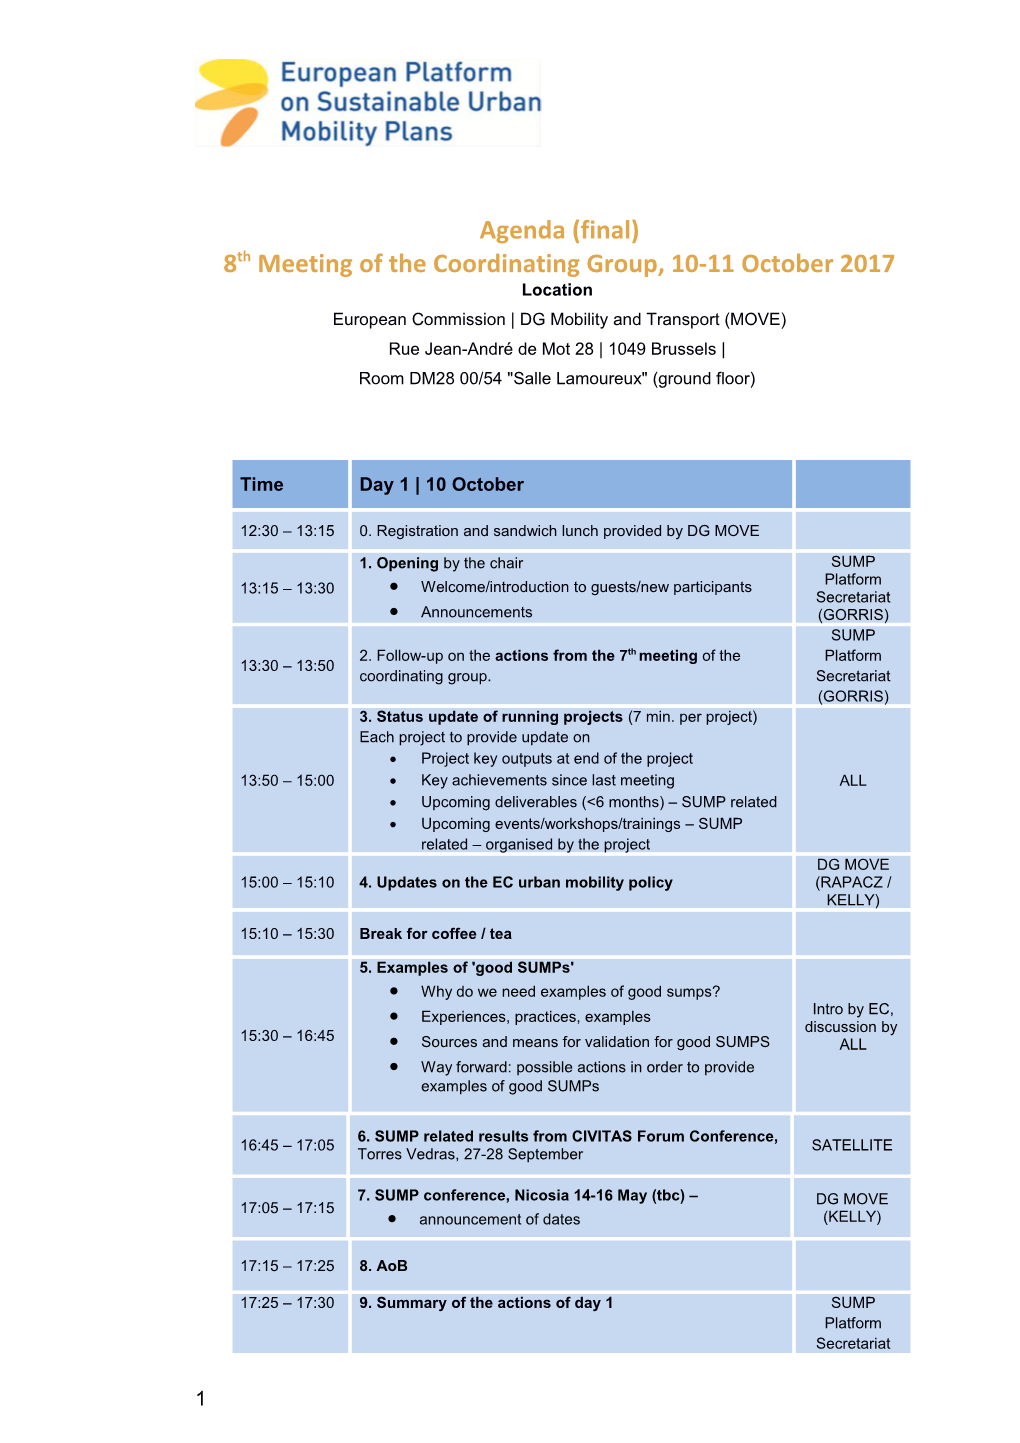 8Thmeeting of the Coordinating Group, 10-11 October 2017